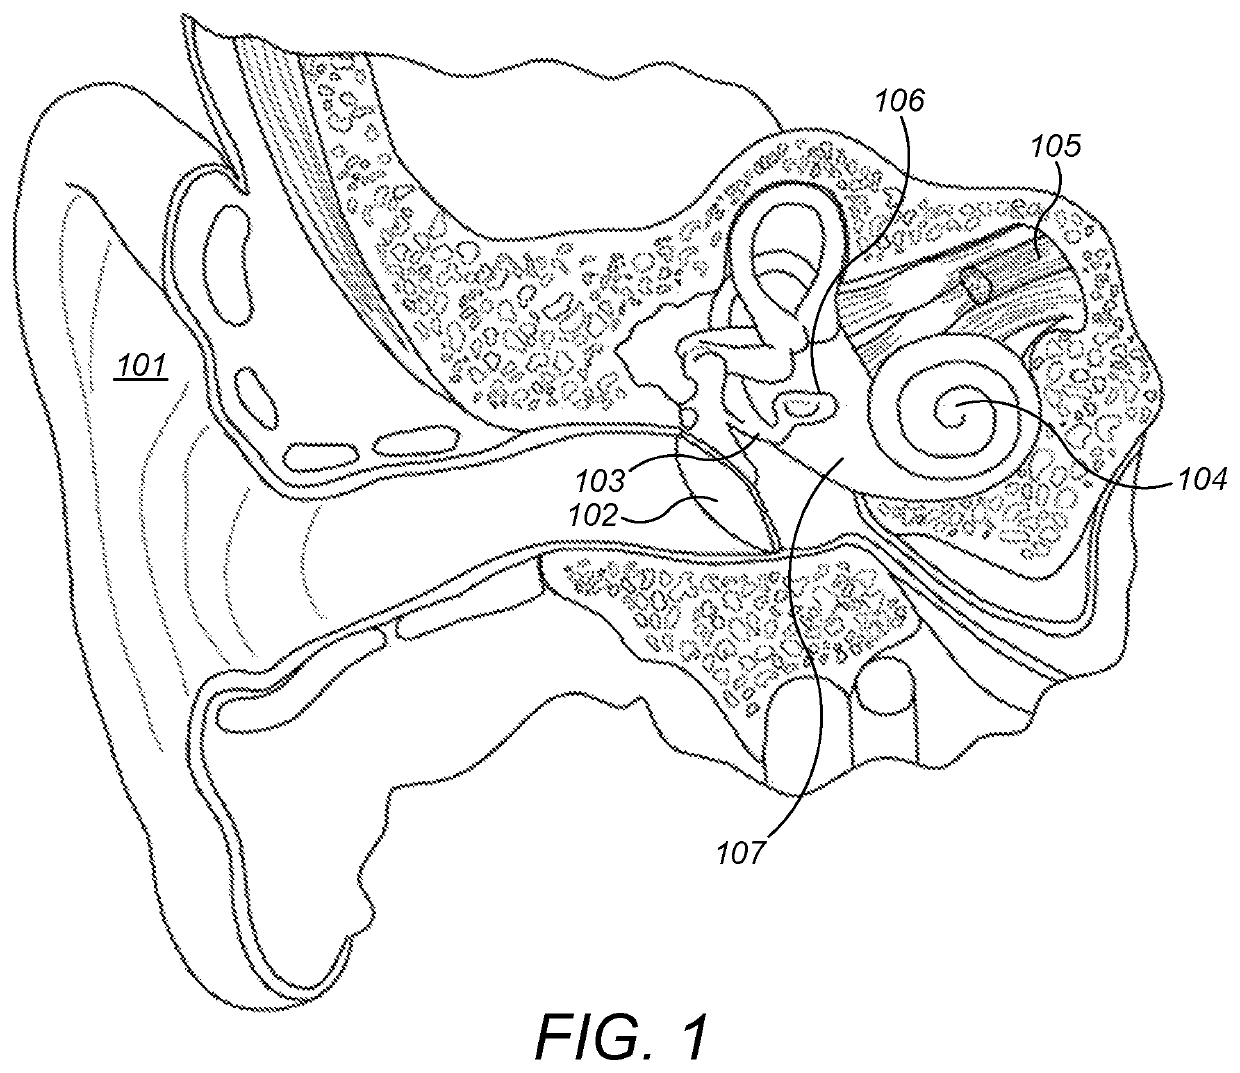 Universal bone conduction and middle ear implant